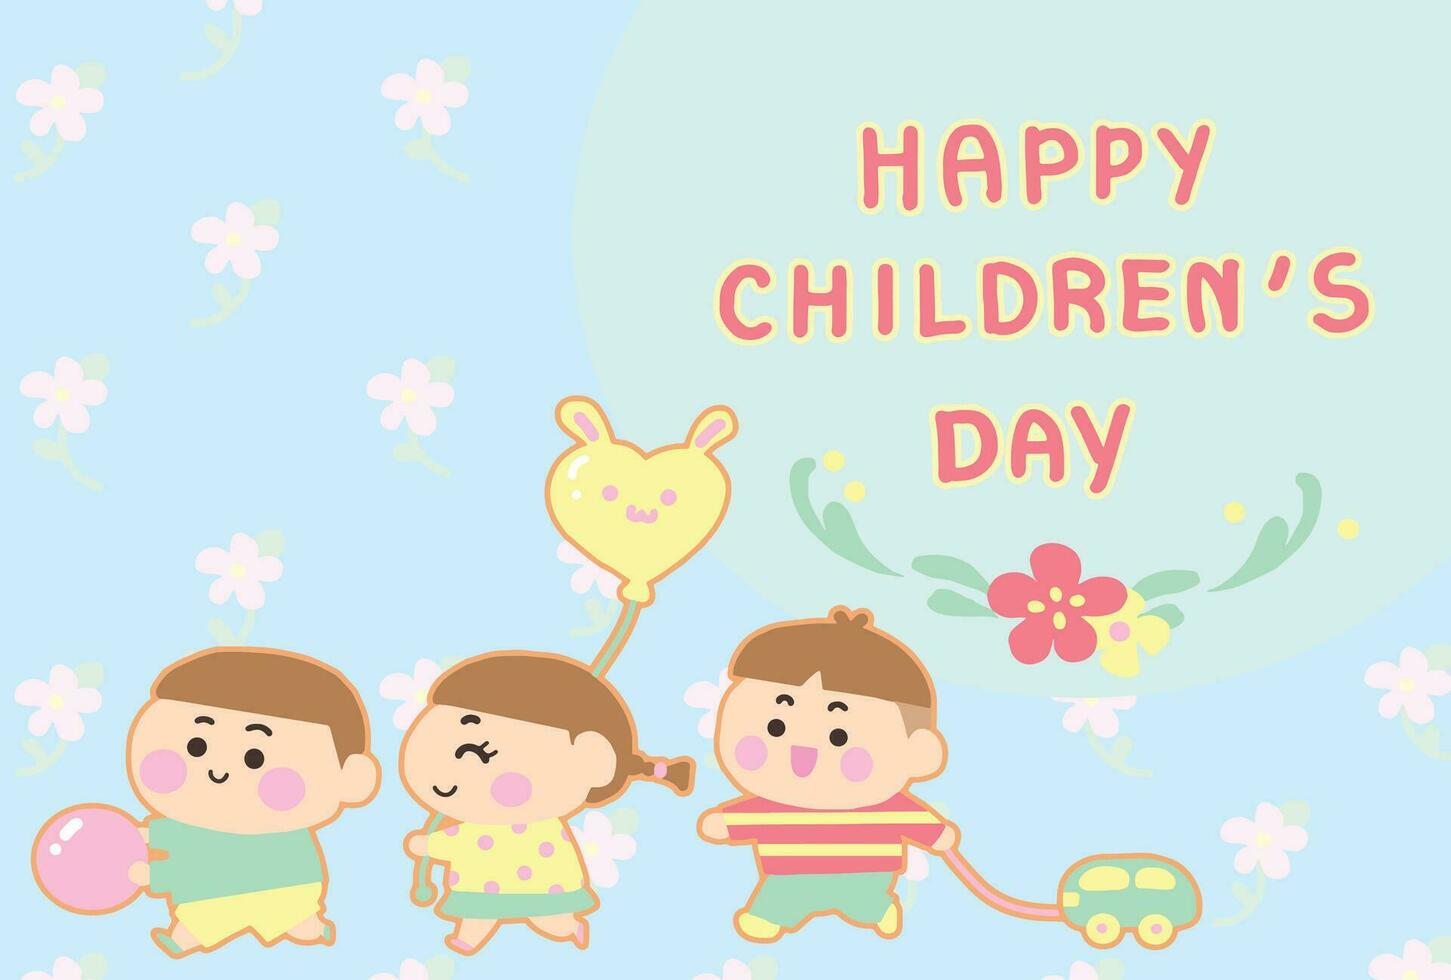 Three kids play and happy ,illustration for Children's day cartoon style. vector